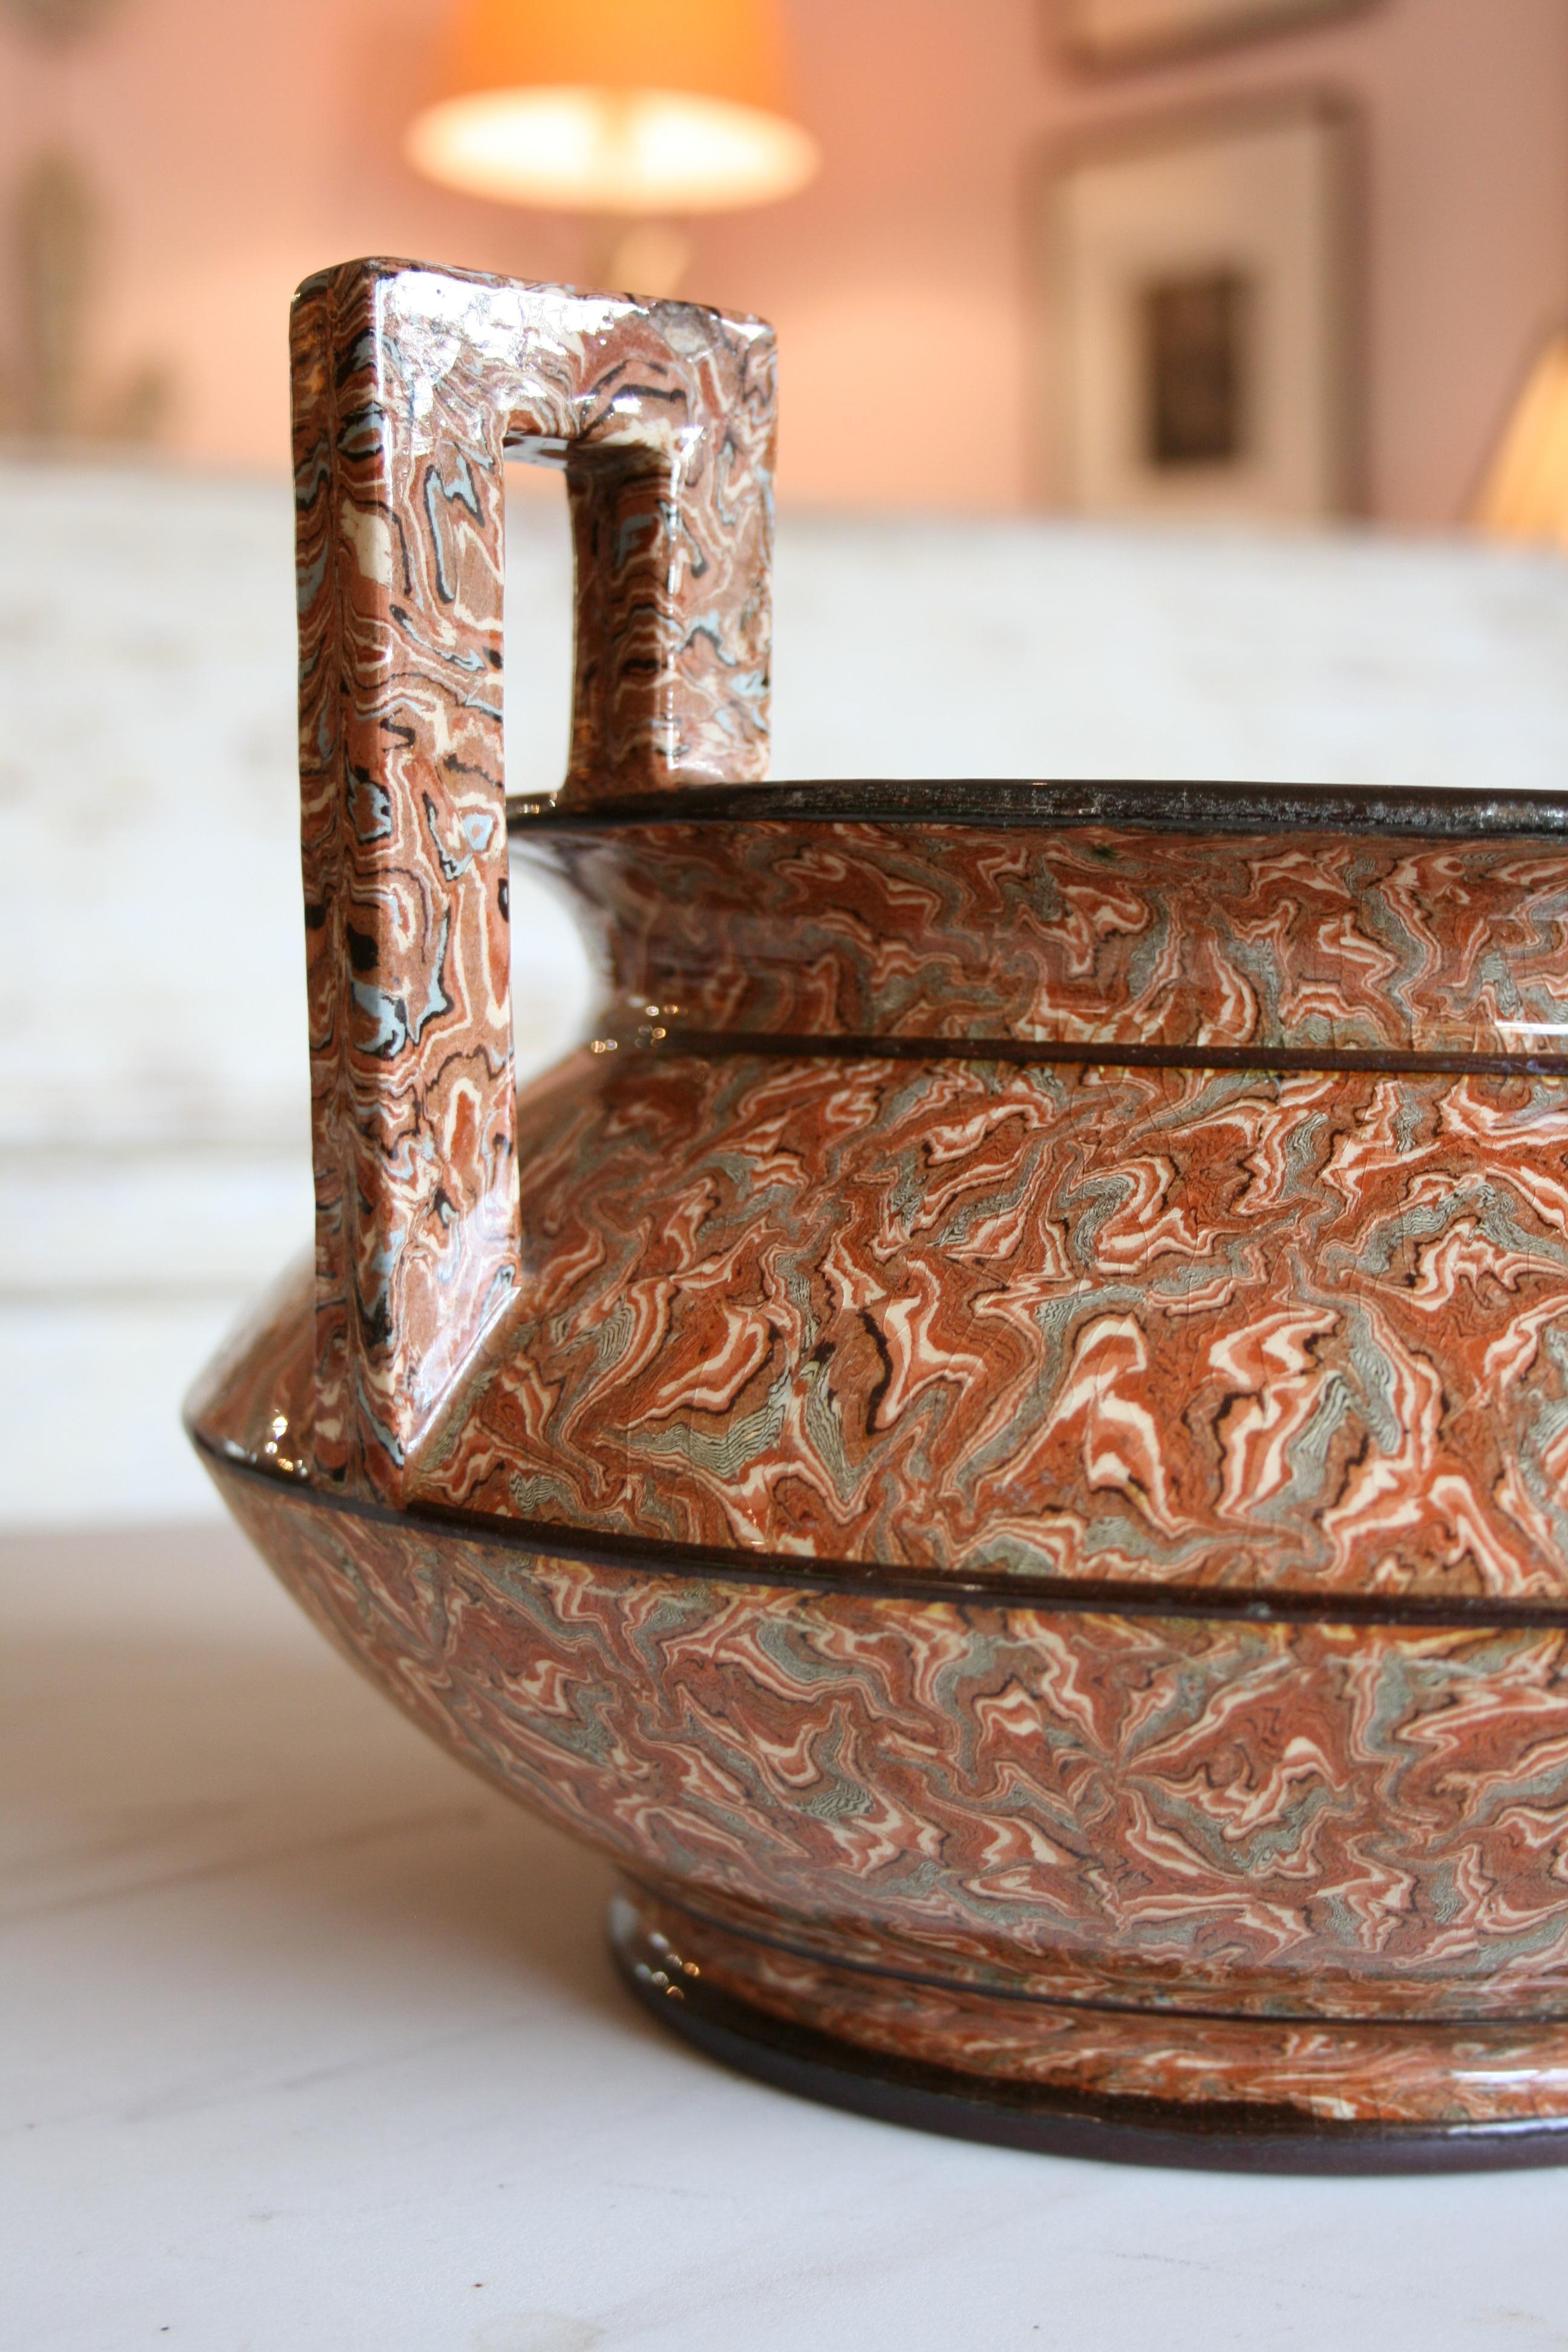 'Pichon' Provencal Agateware Vase with Greek Handles from Uzes Late 19th Century For Sale 1